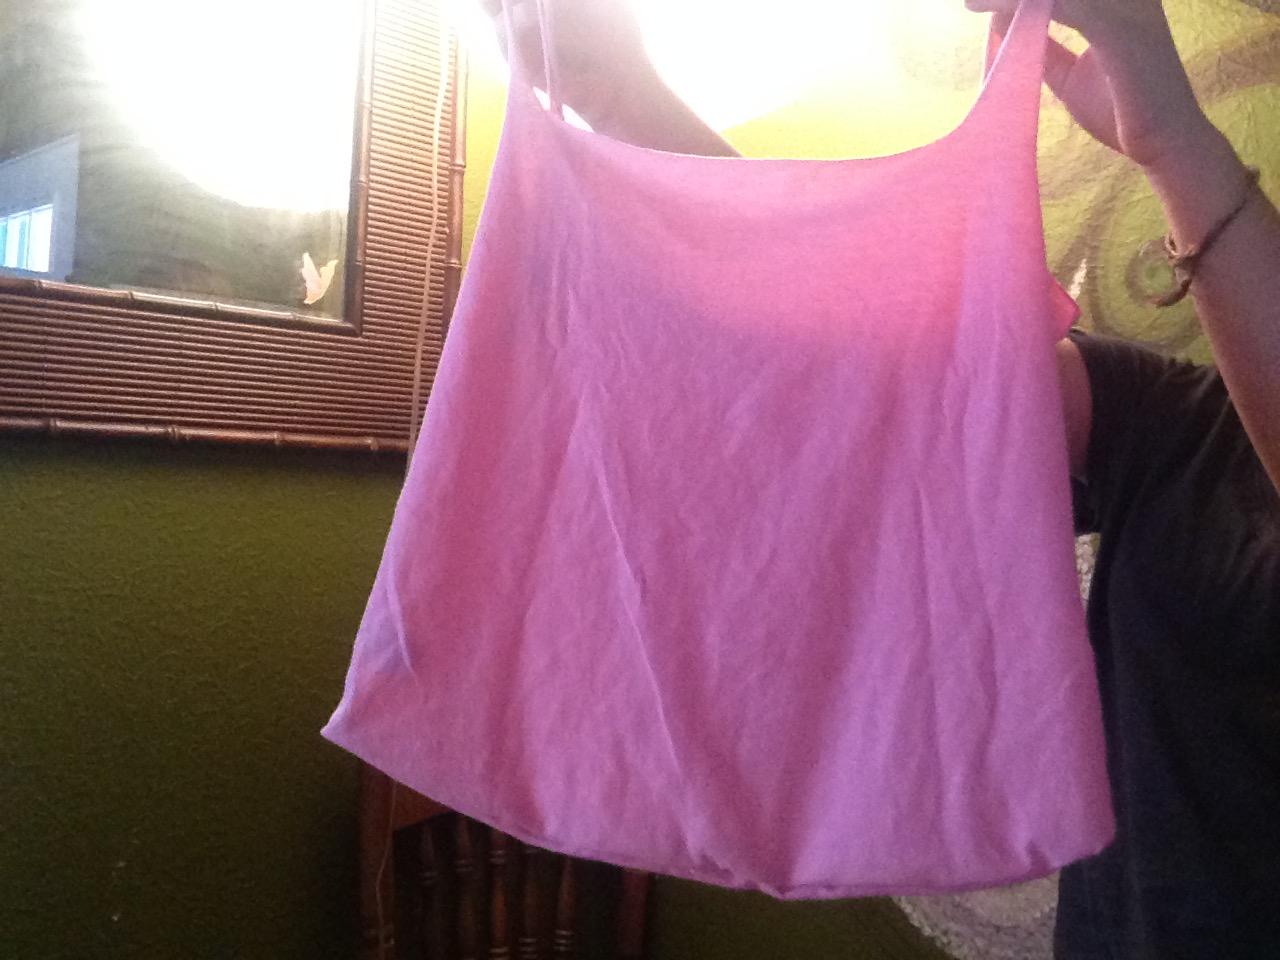 Make a Grocery Bag Out of an Old T-shirt